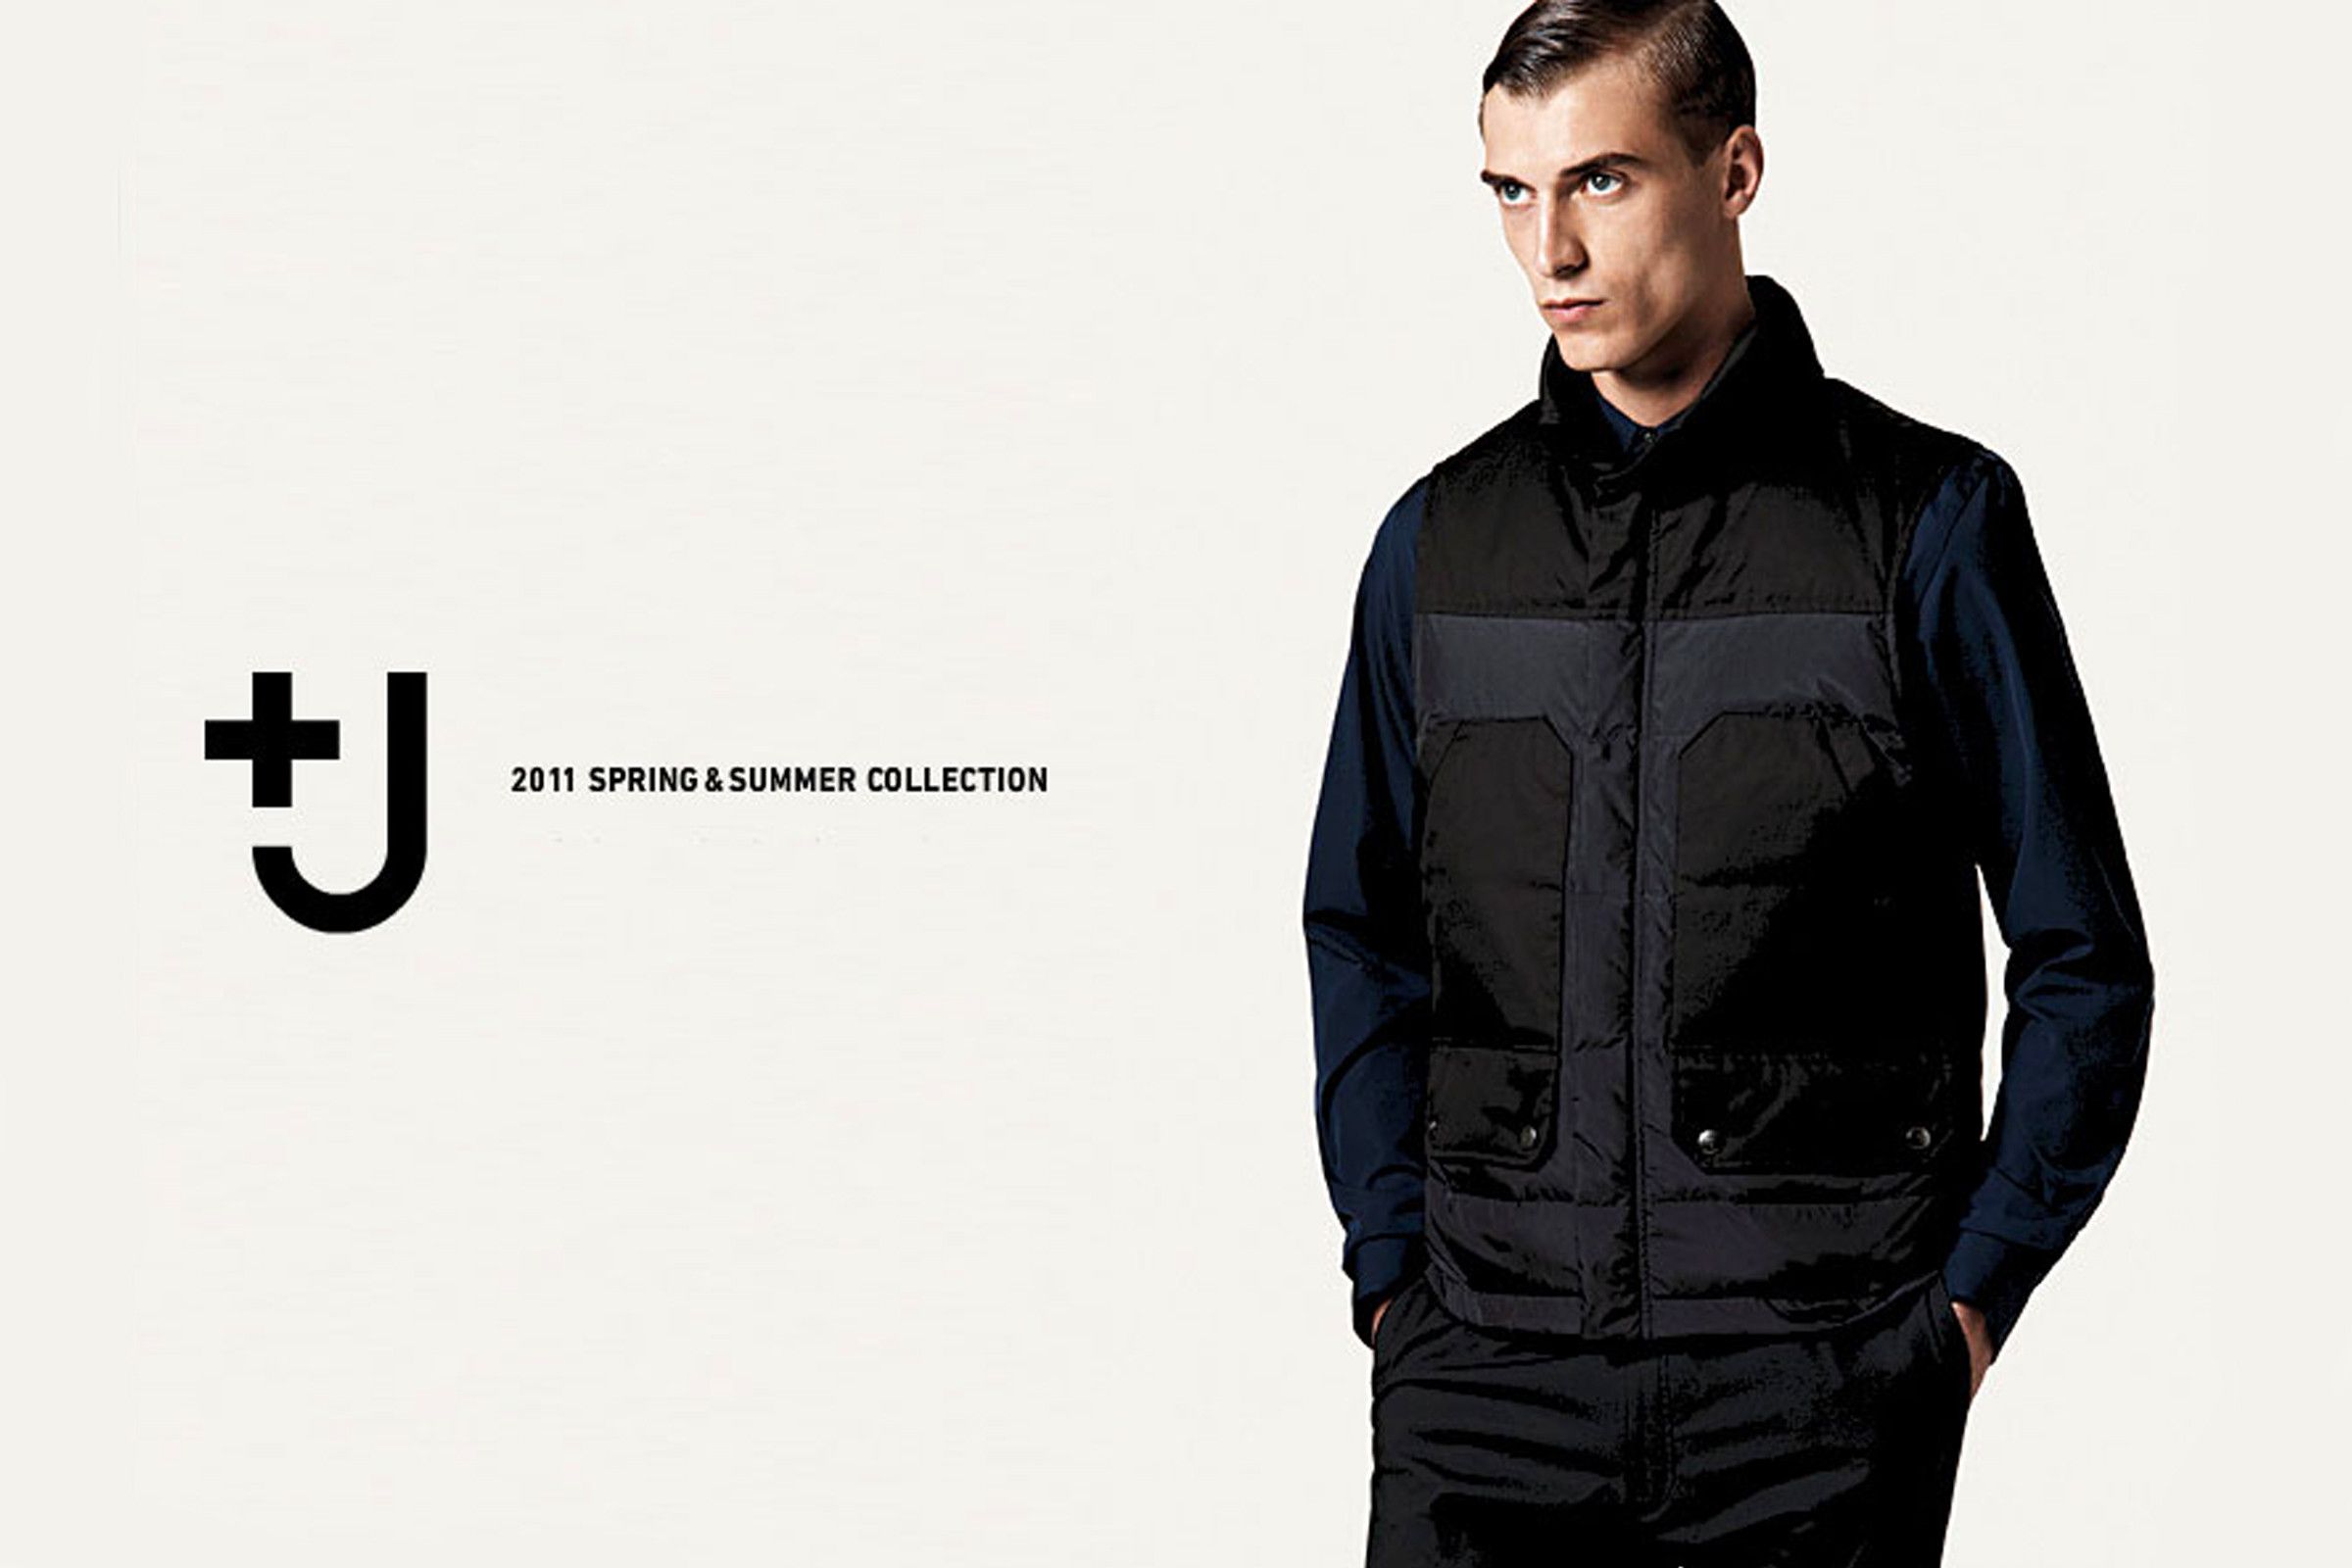 Ad from the Uniqlo +J Spring/Summer 2011 collection